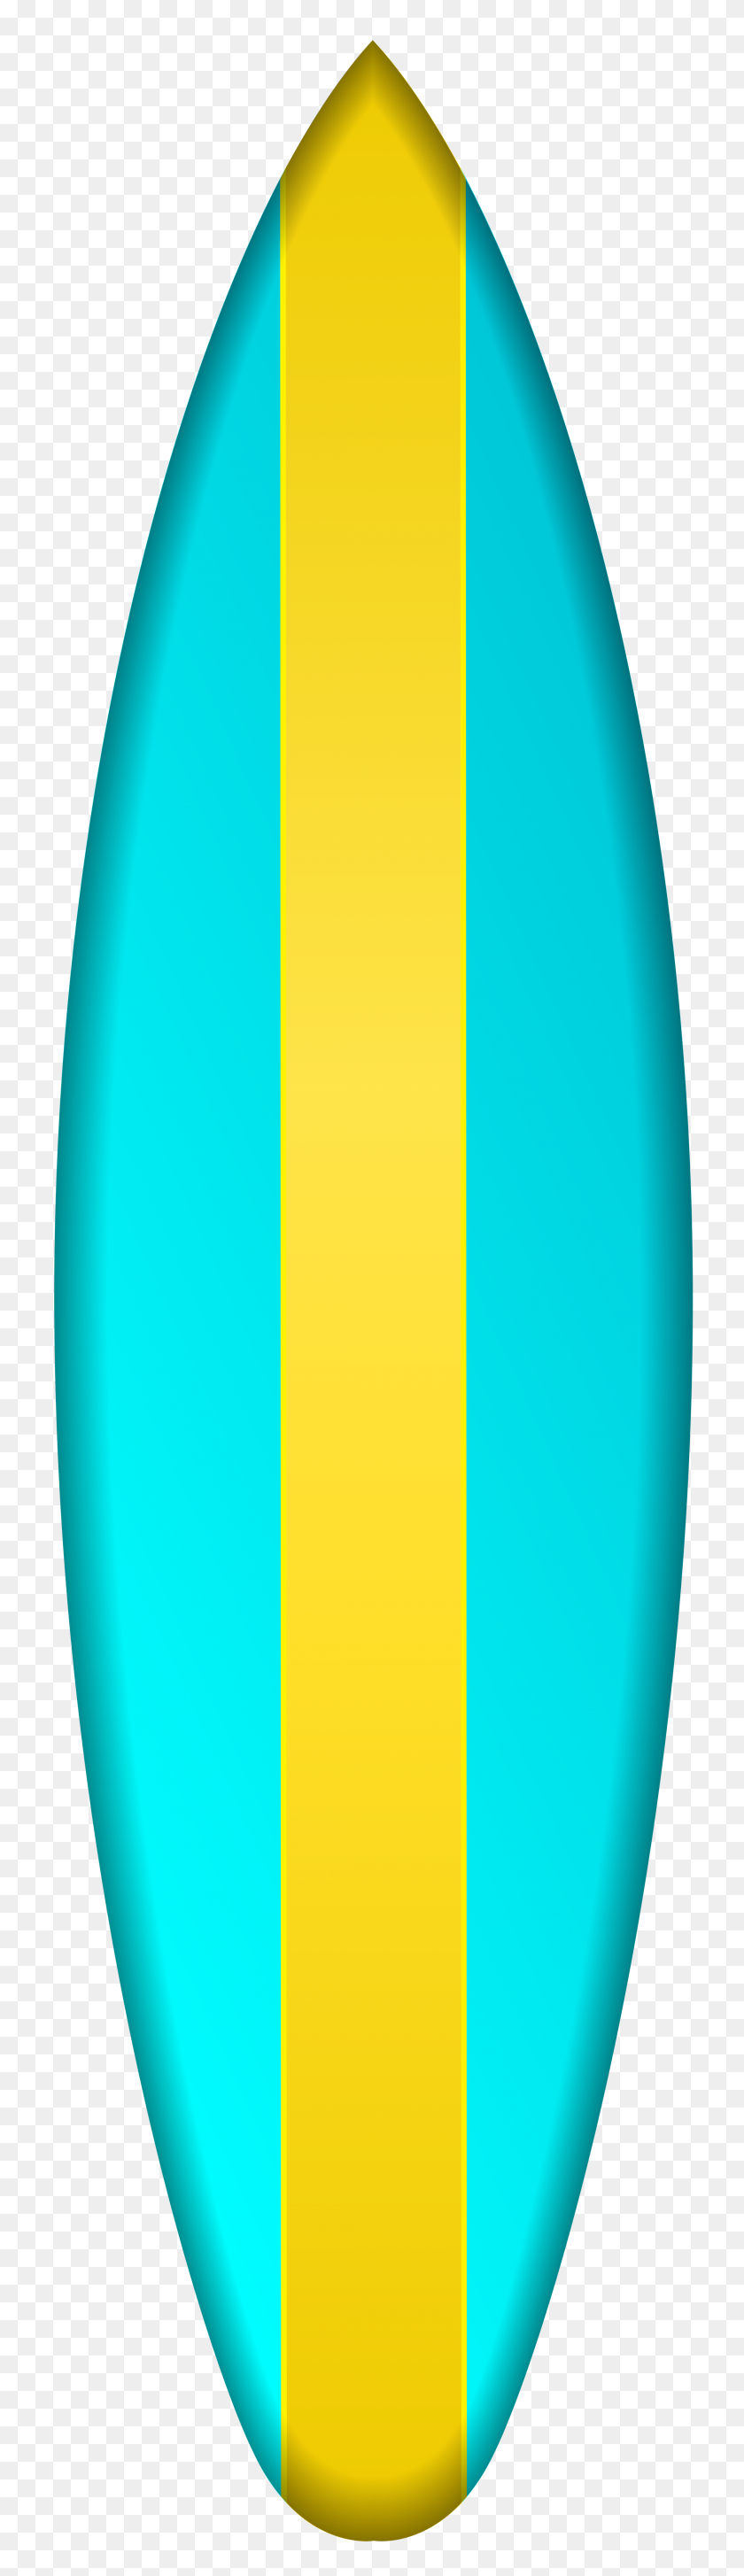 2190x8000 Surfboard Transparent Png Clip - Surfboard PNG